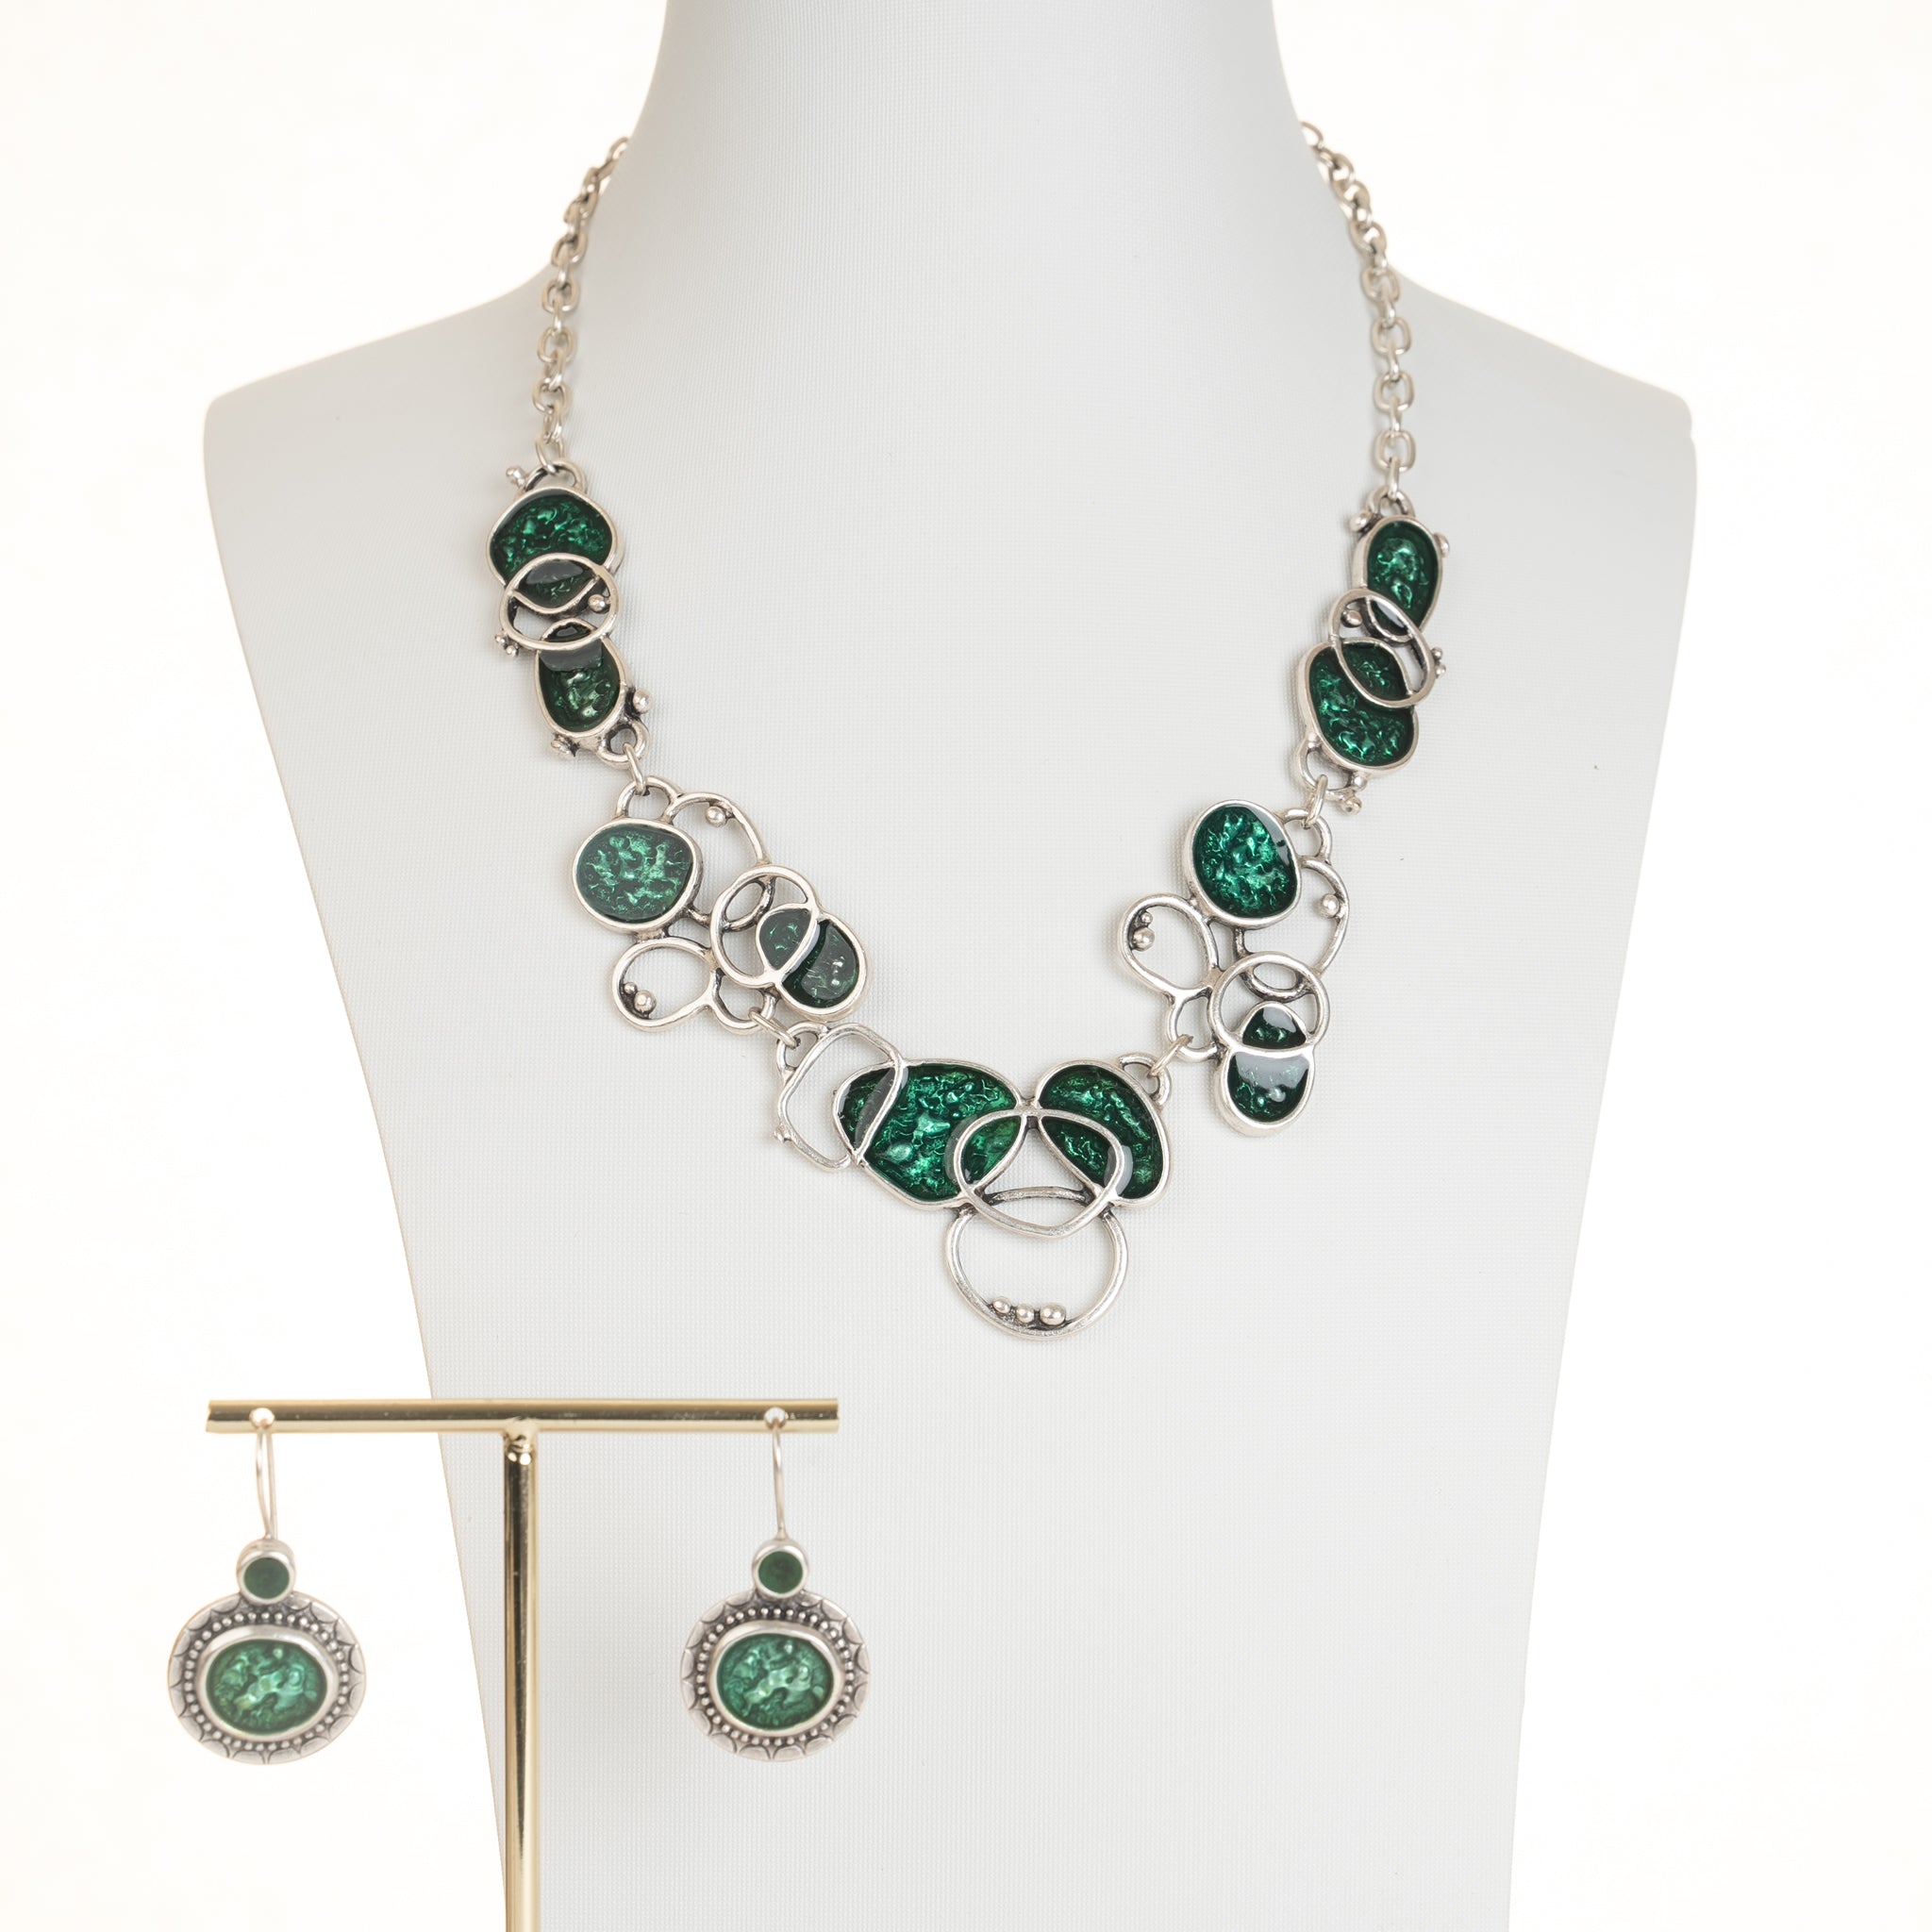 Euphoria Green Necklace and Earrings Set - Cherry Blossom